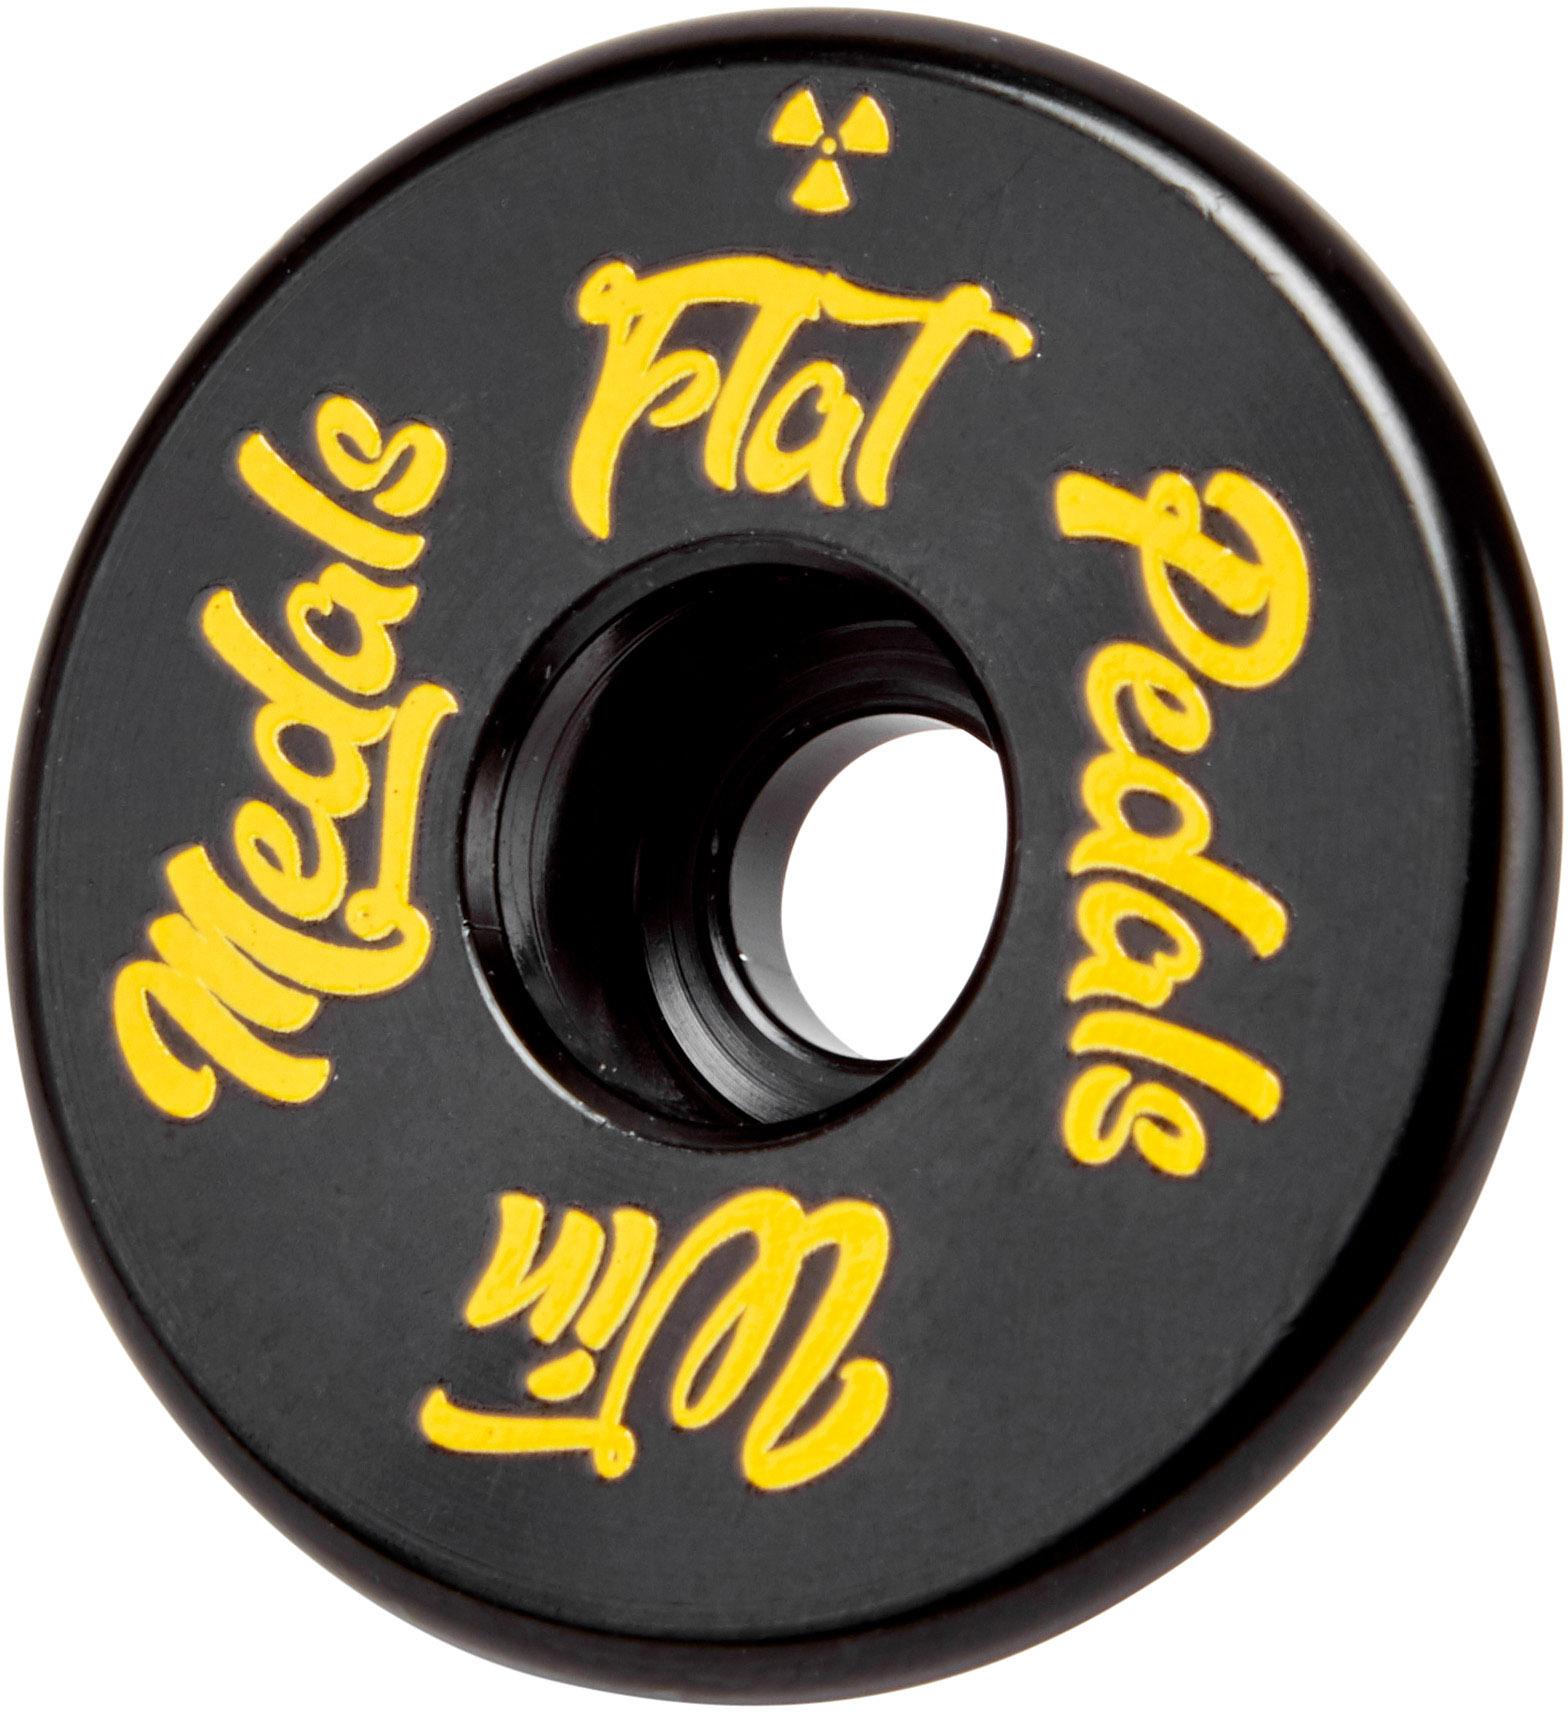 Nukeproof Top Cap And Star Nut - Flat Pedals Win